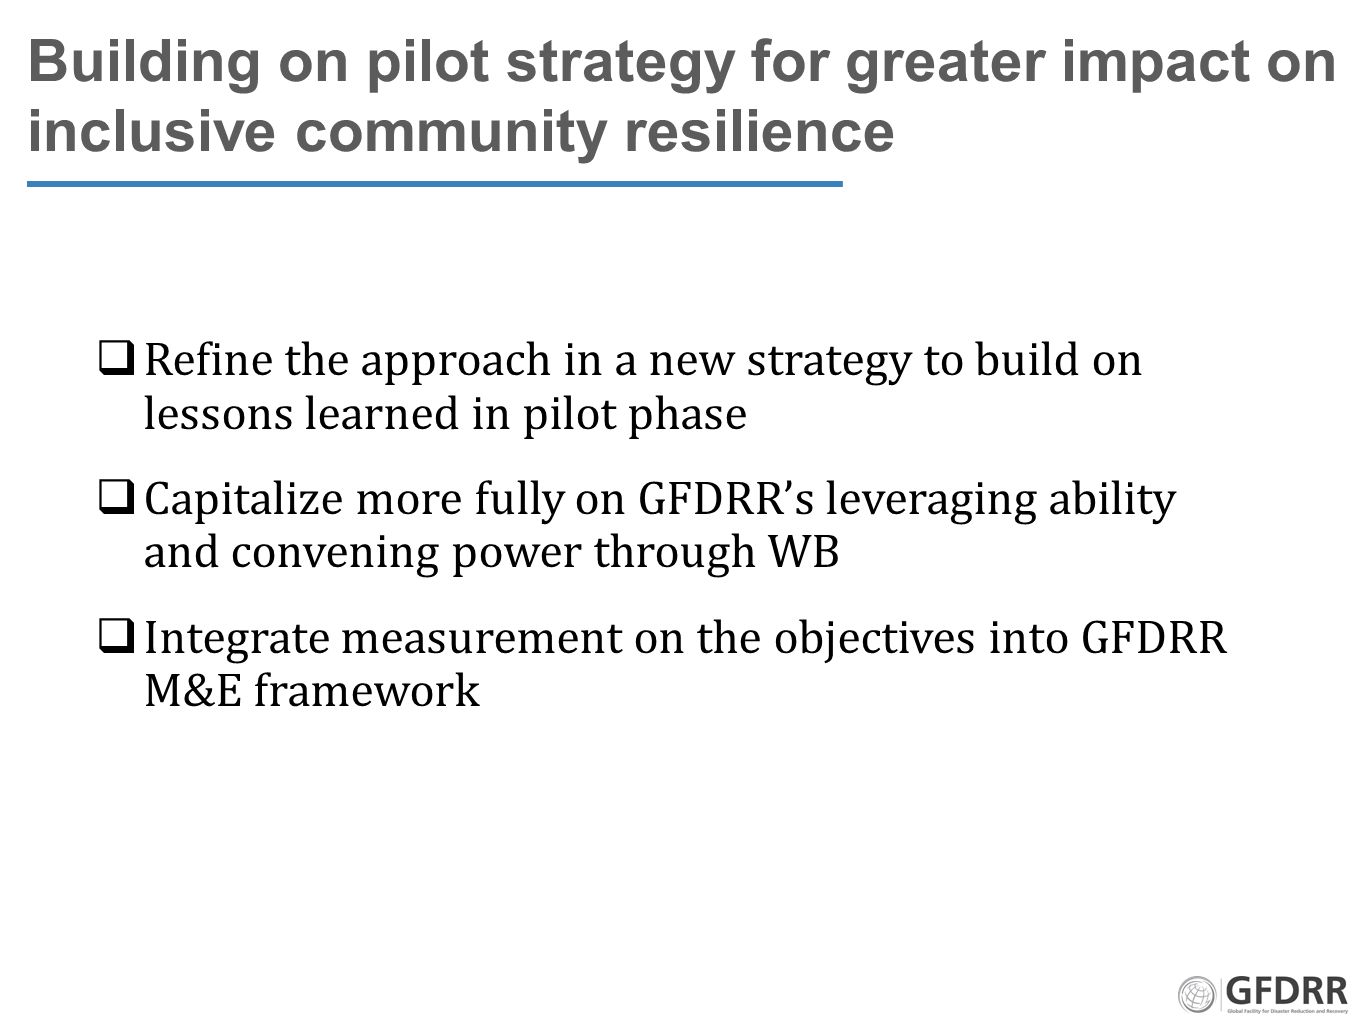 Building on pilot strategy for greater impact on inclusive community resilience  Refine the approach in a new strategy to build on lessons learned in pilot phase  Capitalize more fully on GFDRR’s leveraging ability and convening power through WB  Integrate measurement on the objectives into GFDRR M&E framework